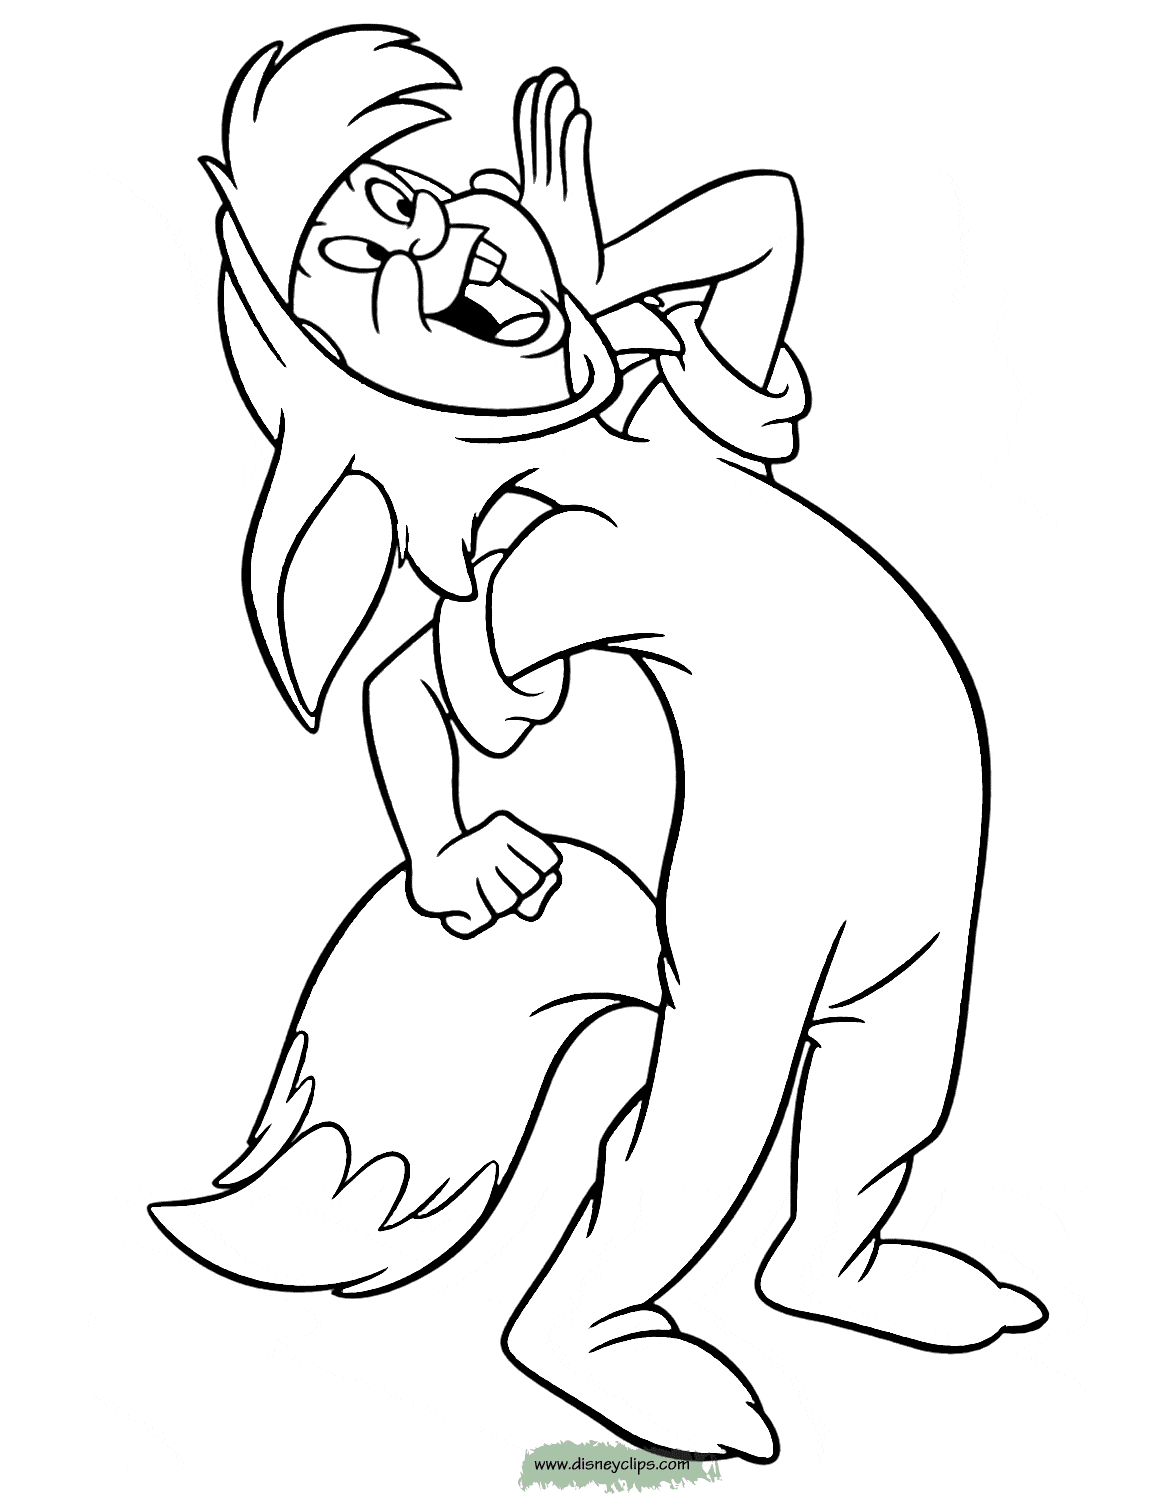 Lost Boy Slightly Coloring Page